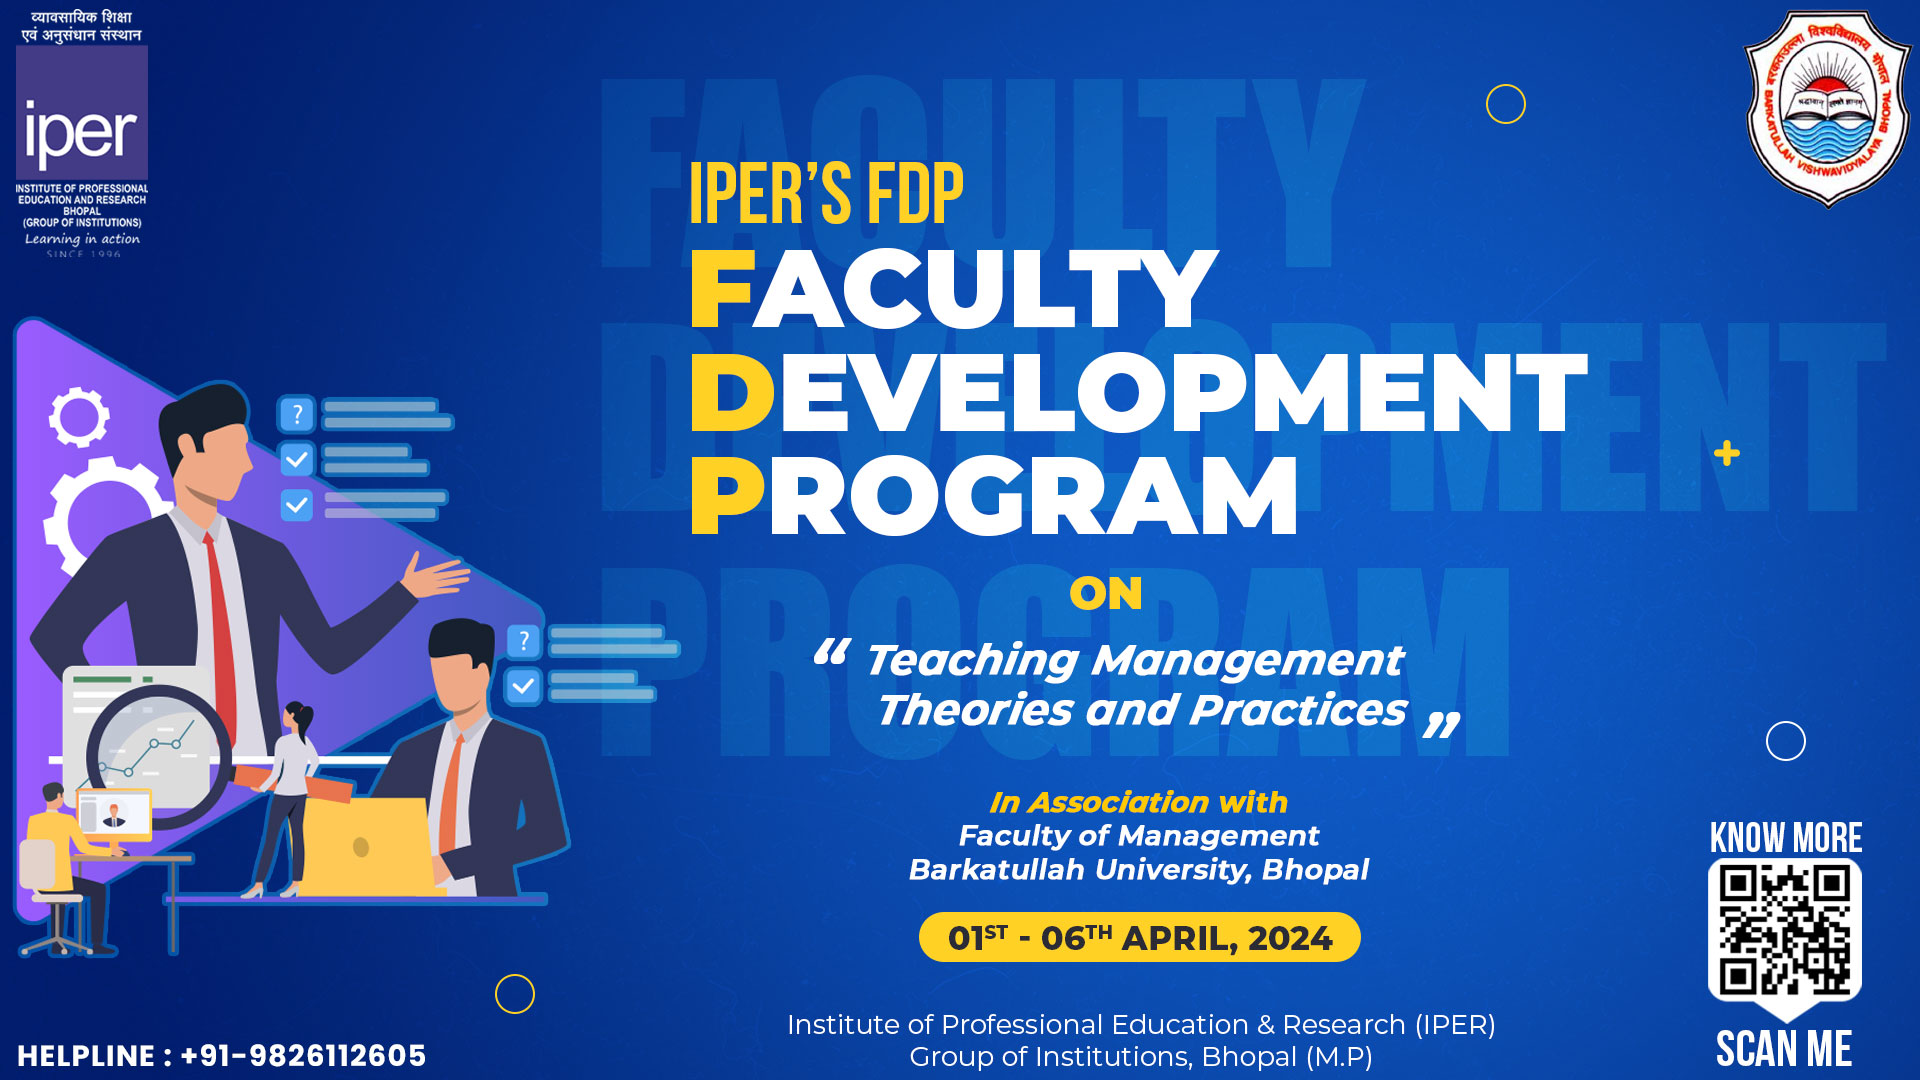 Faculty Development Programme (FDP) at IPER on “Contemporary Management Theories & Practices” – on 1st to 6th April, 2024